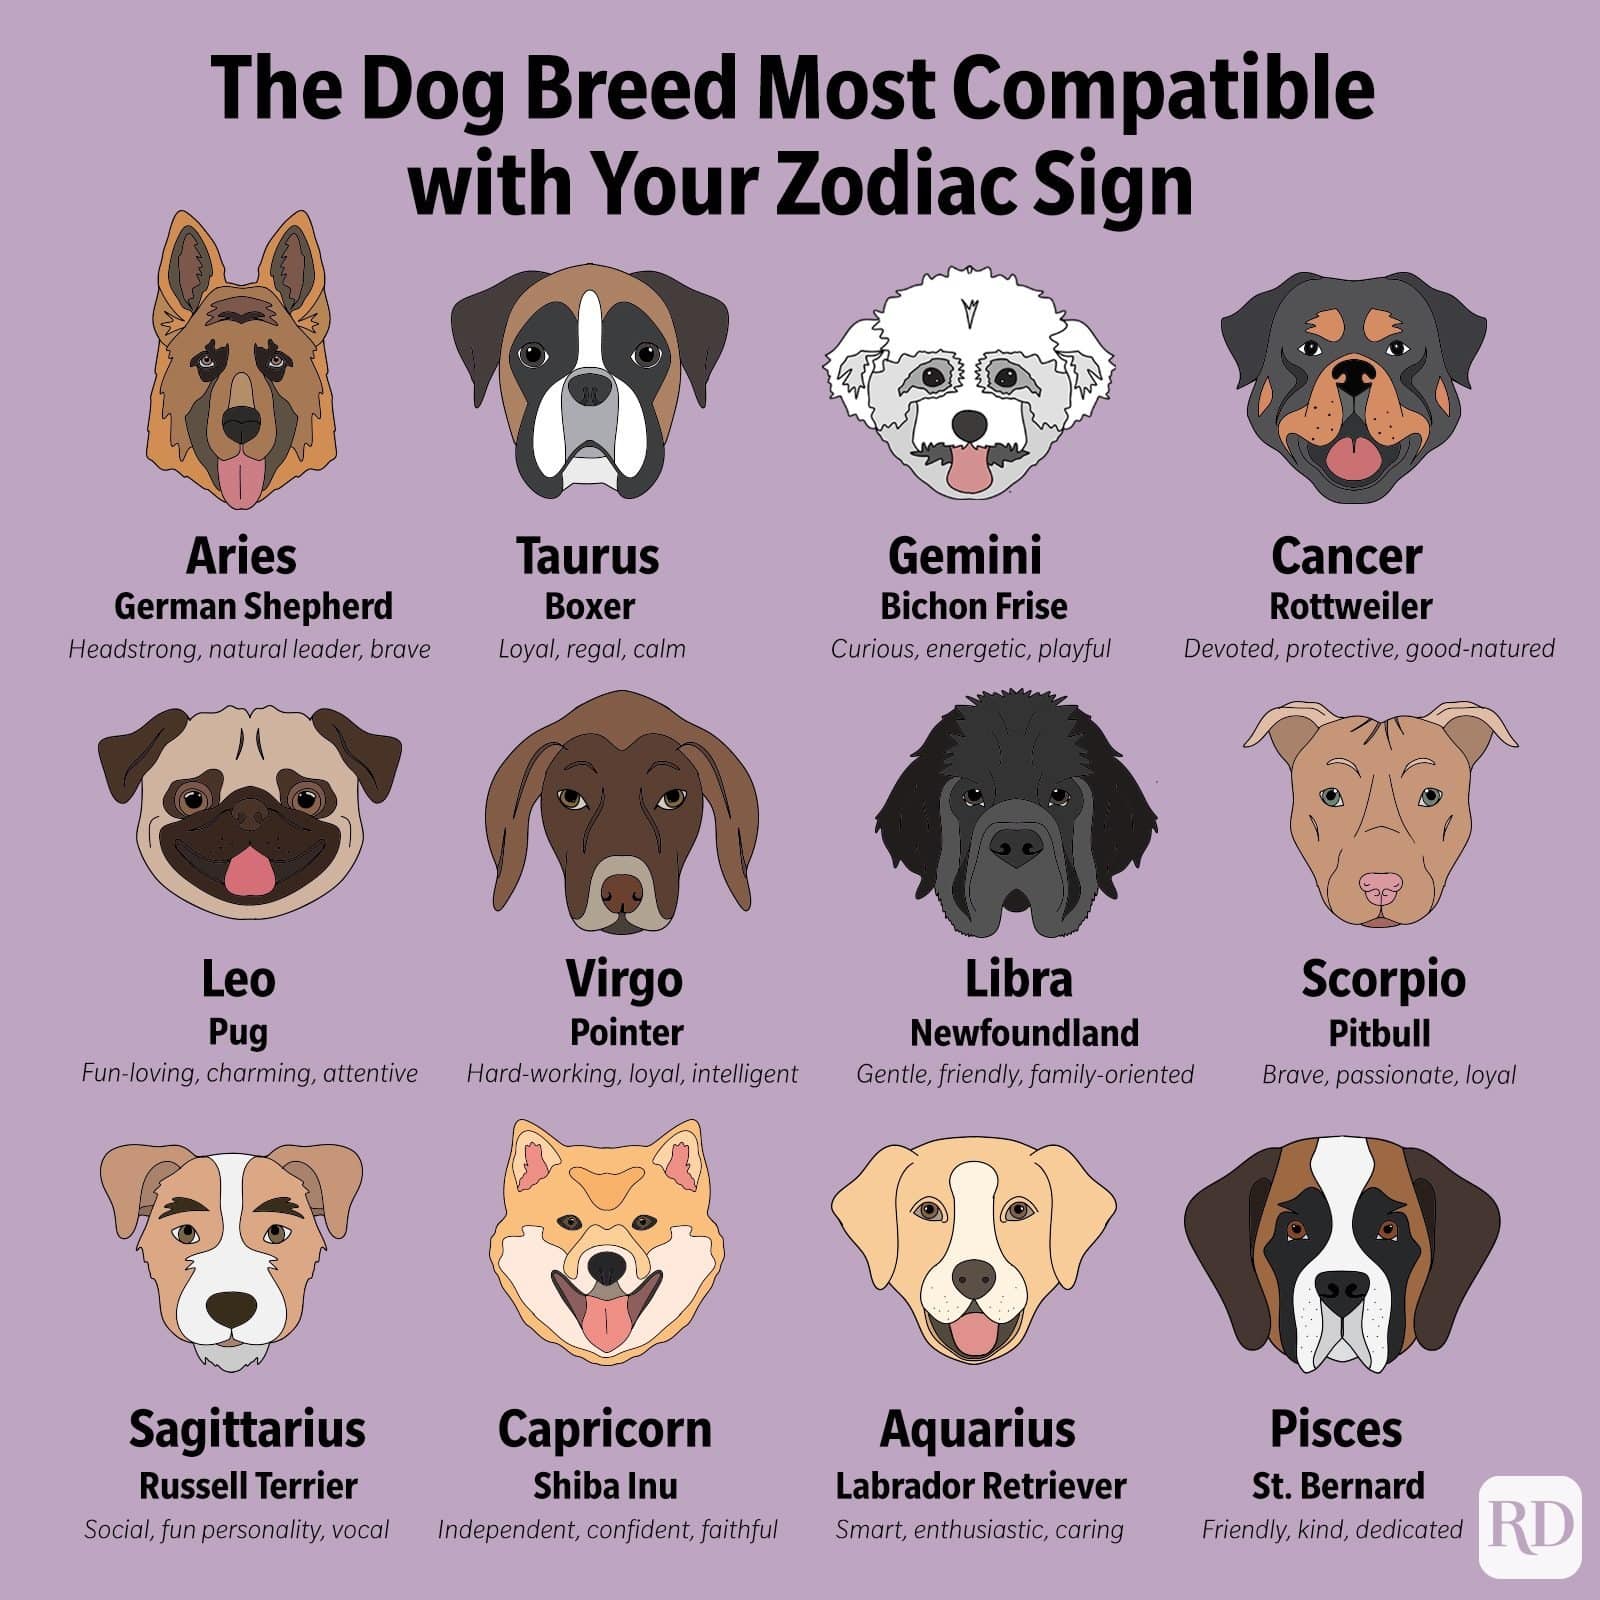 This Is the Dog Breed Thatâs Most Compatible with Your Zodiac Sign ...